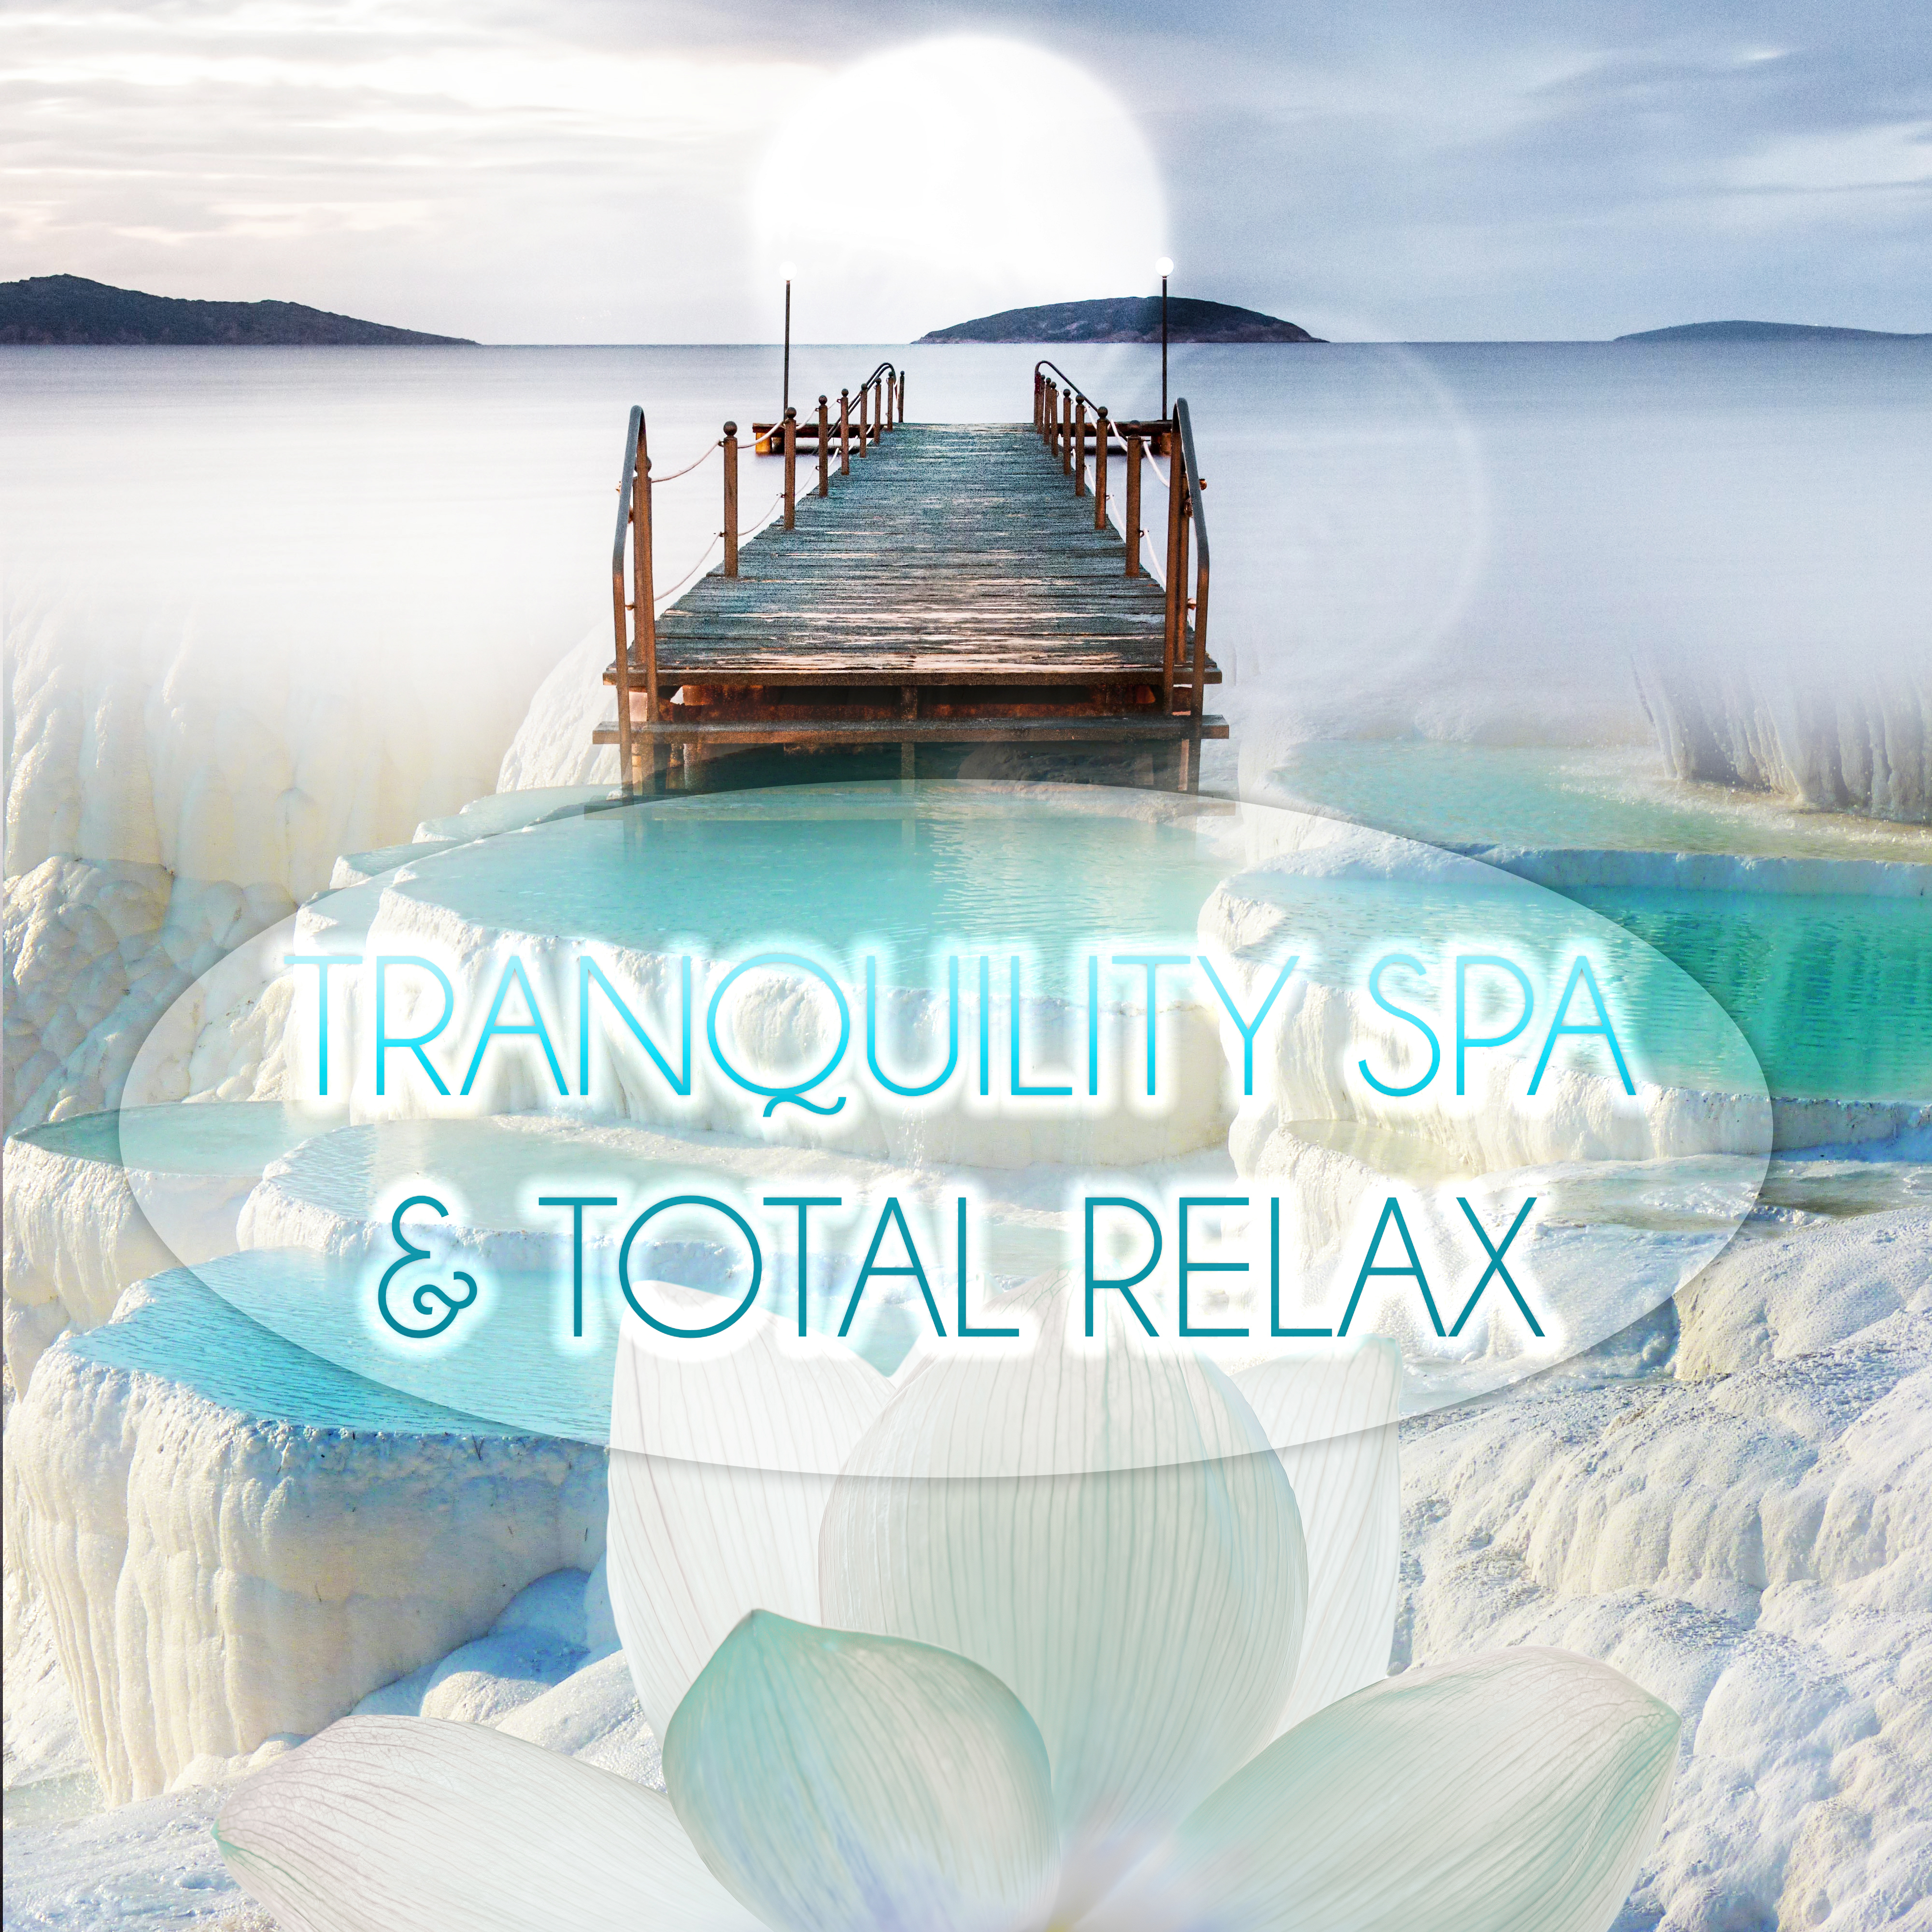 Tranquility Spa & Total Relax - Most Popular Songs for Massage Therapy, Music for Healing Through Sound and Touch, Serenity Relaxing Spa, Piano Music and Sounds of Nature Music for Relaxation